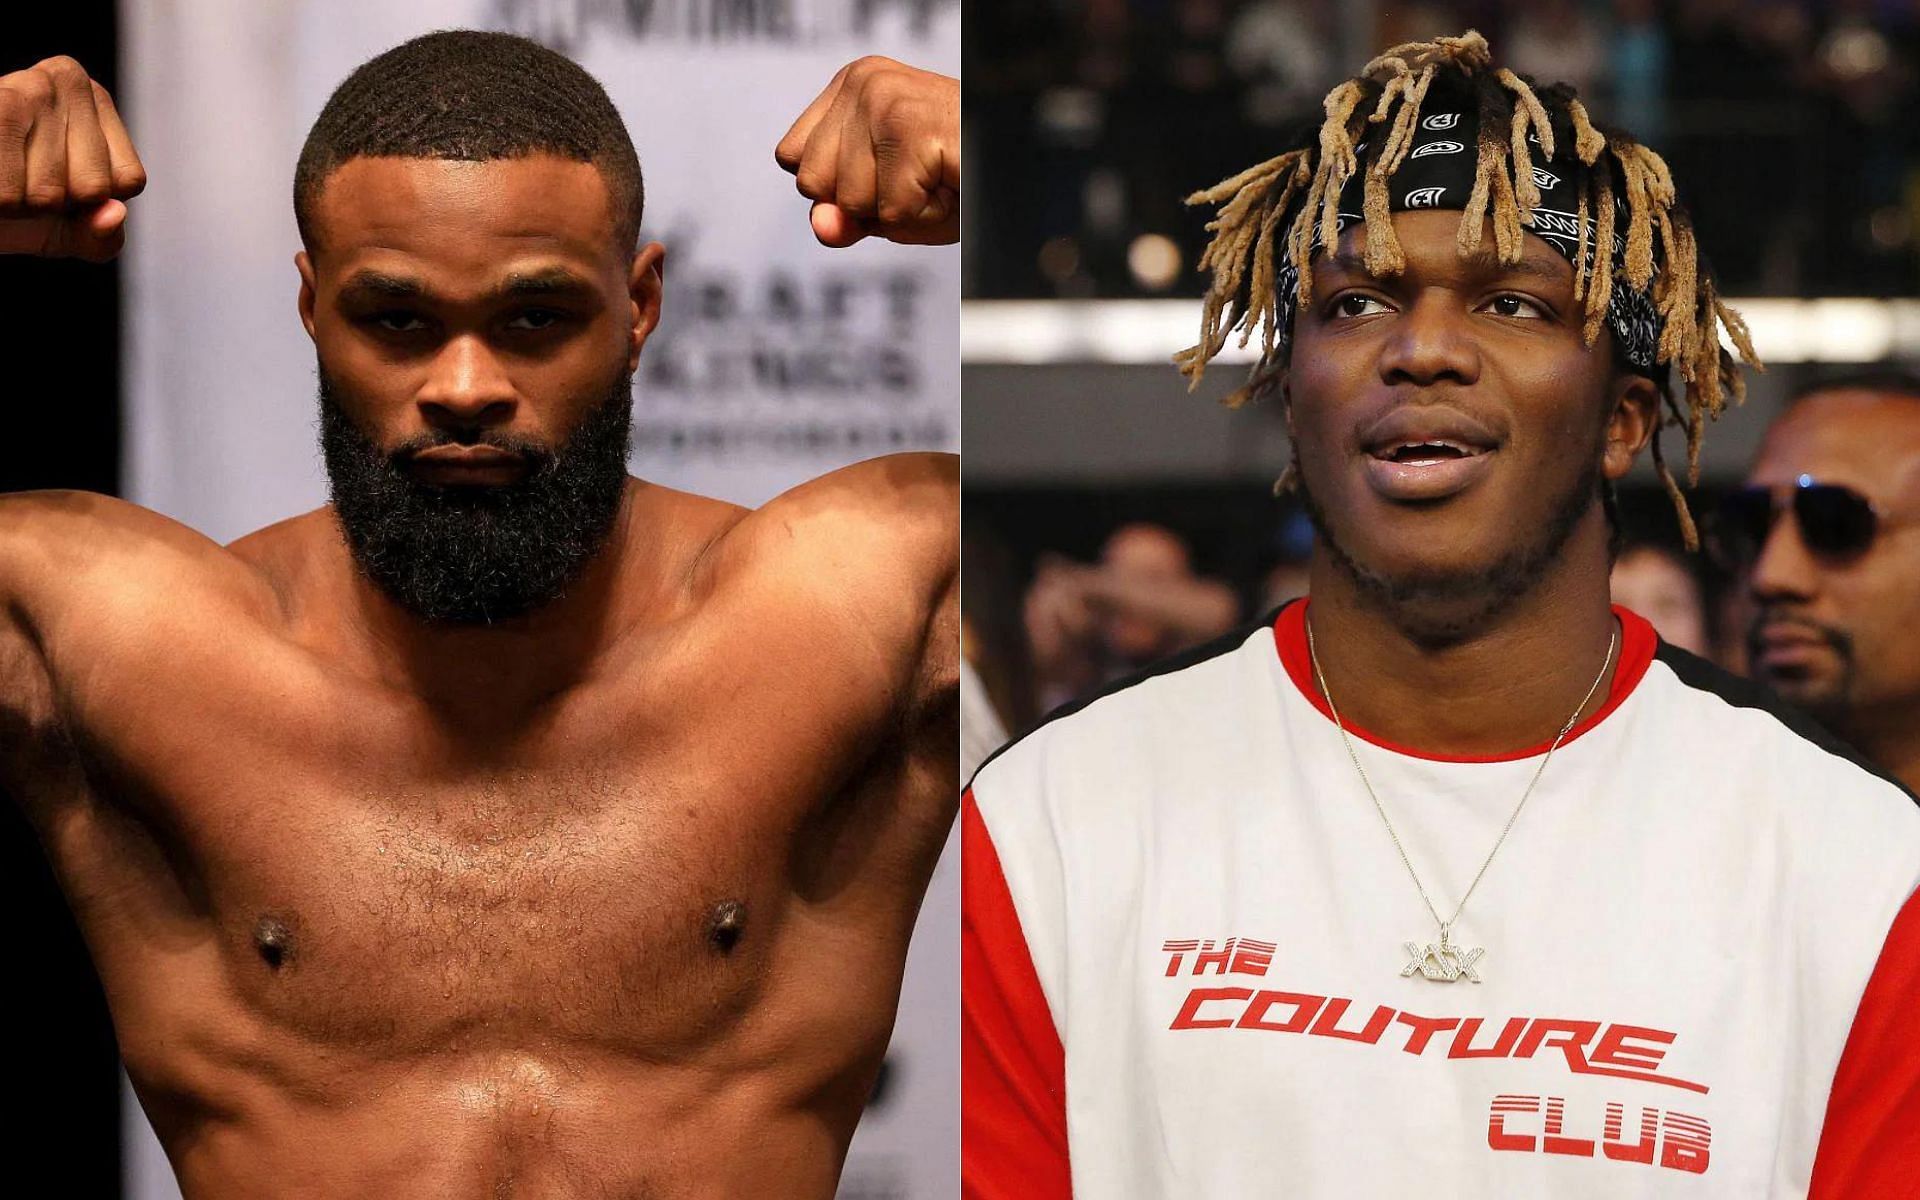 Tyron Woodley (left) and KSI (right)